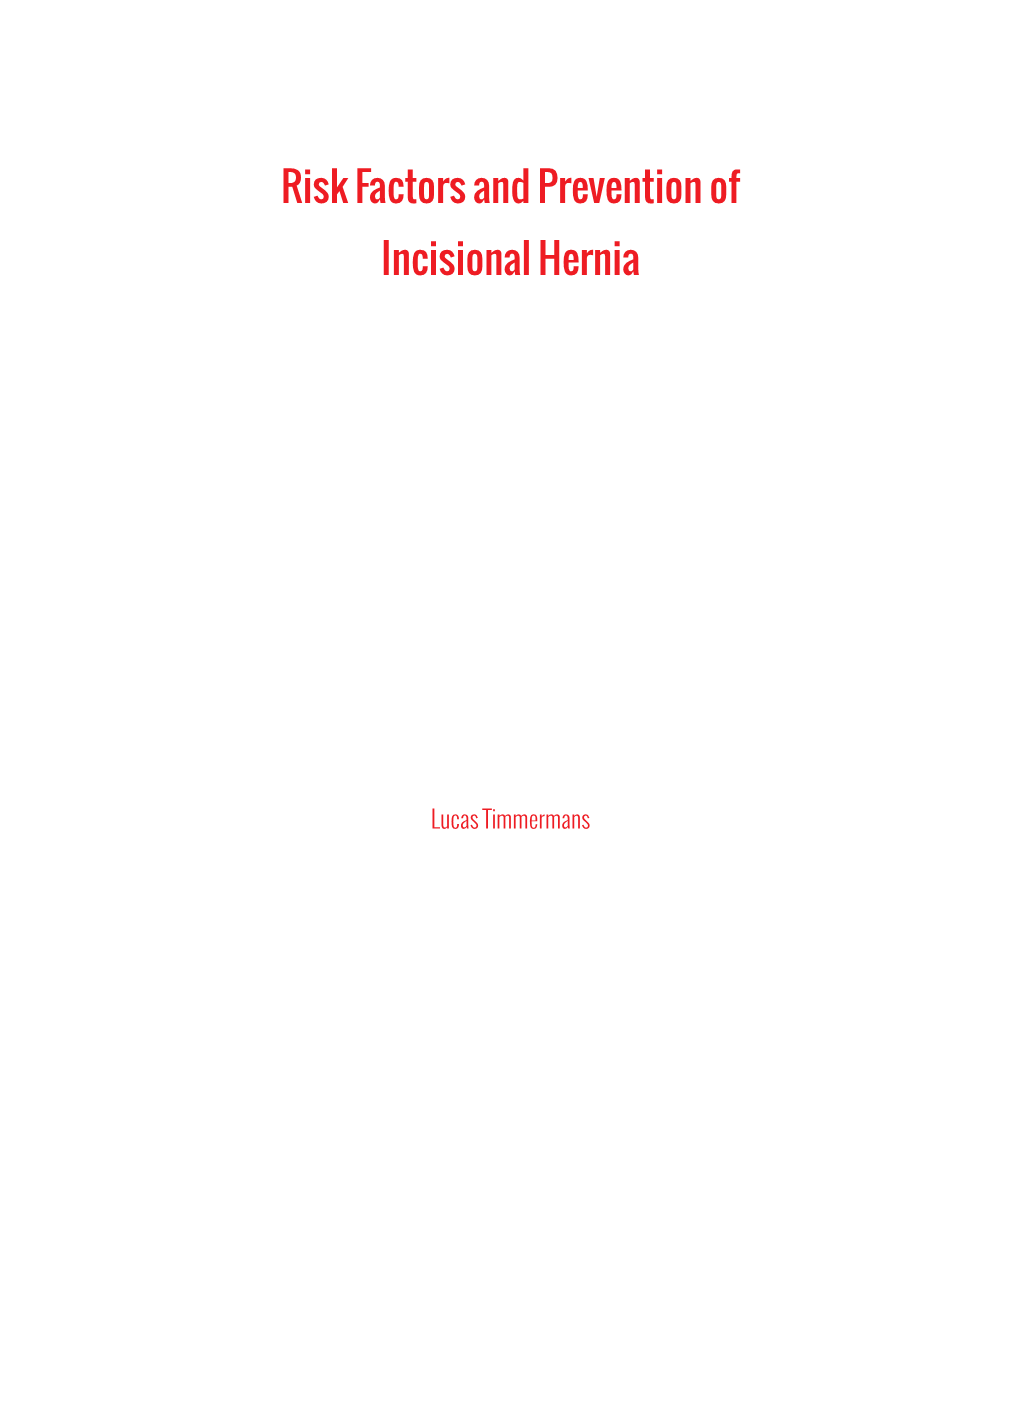 Risk Factors and Prevention of Incisional Hernia